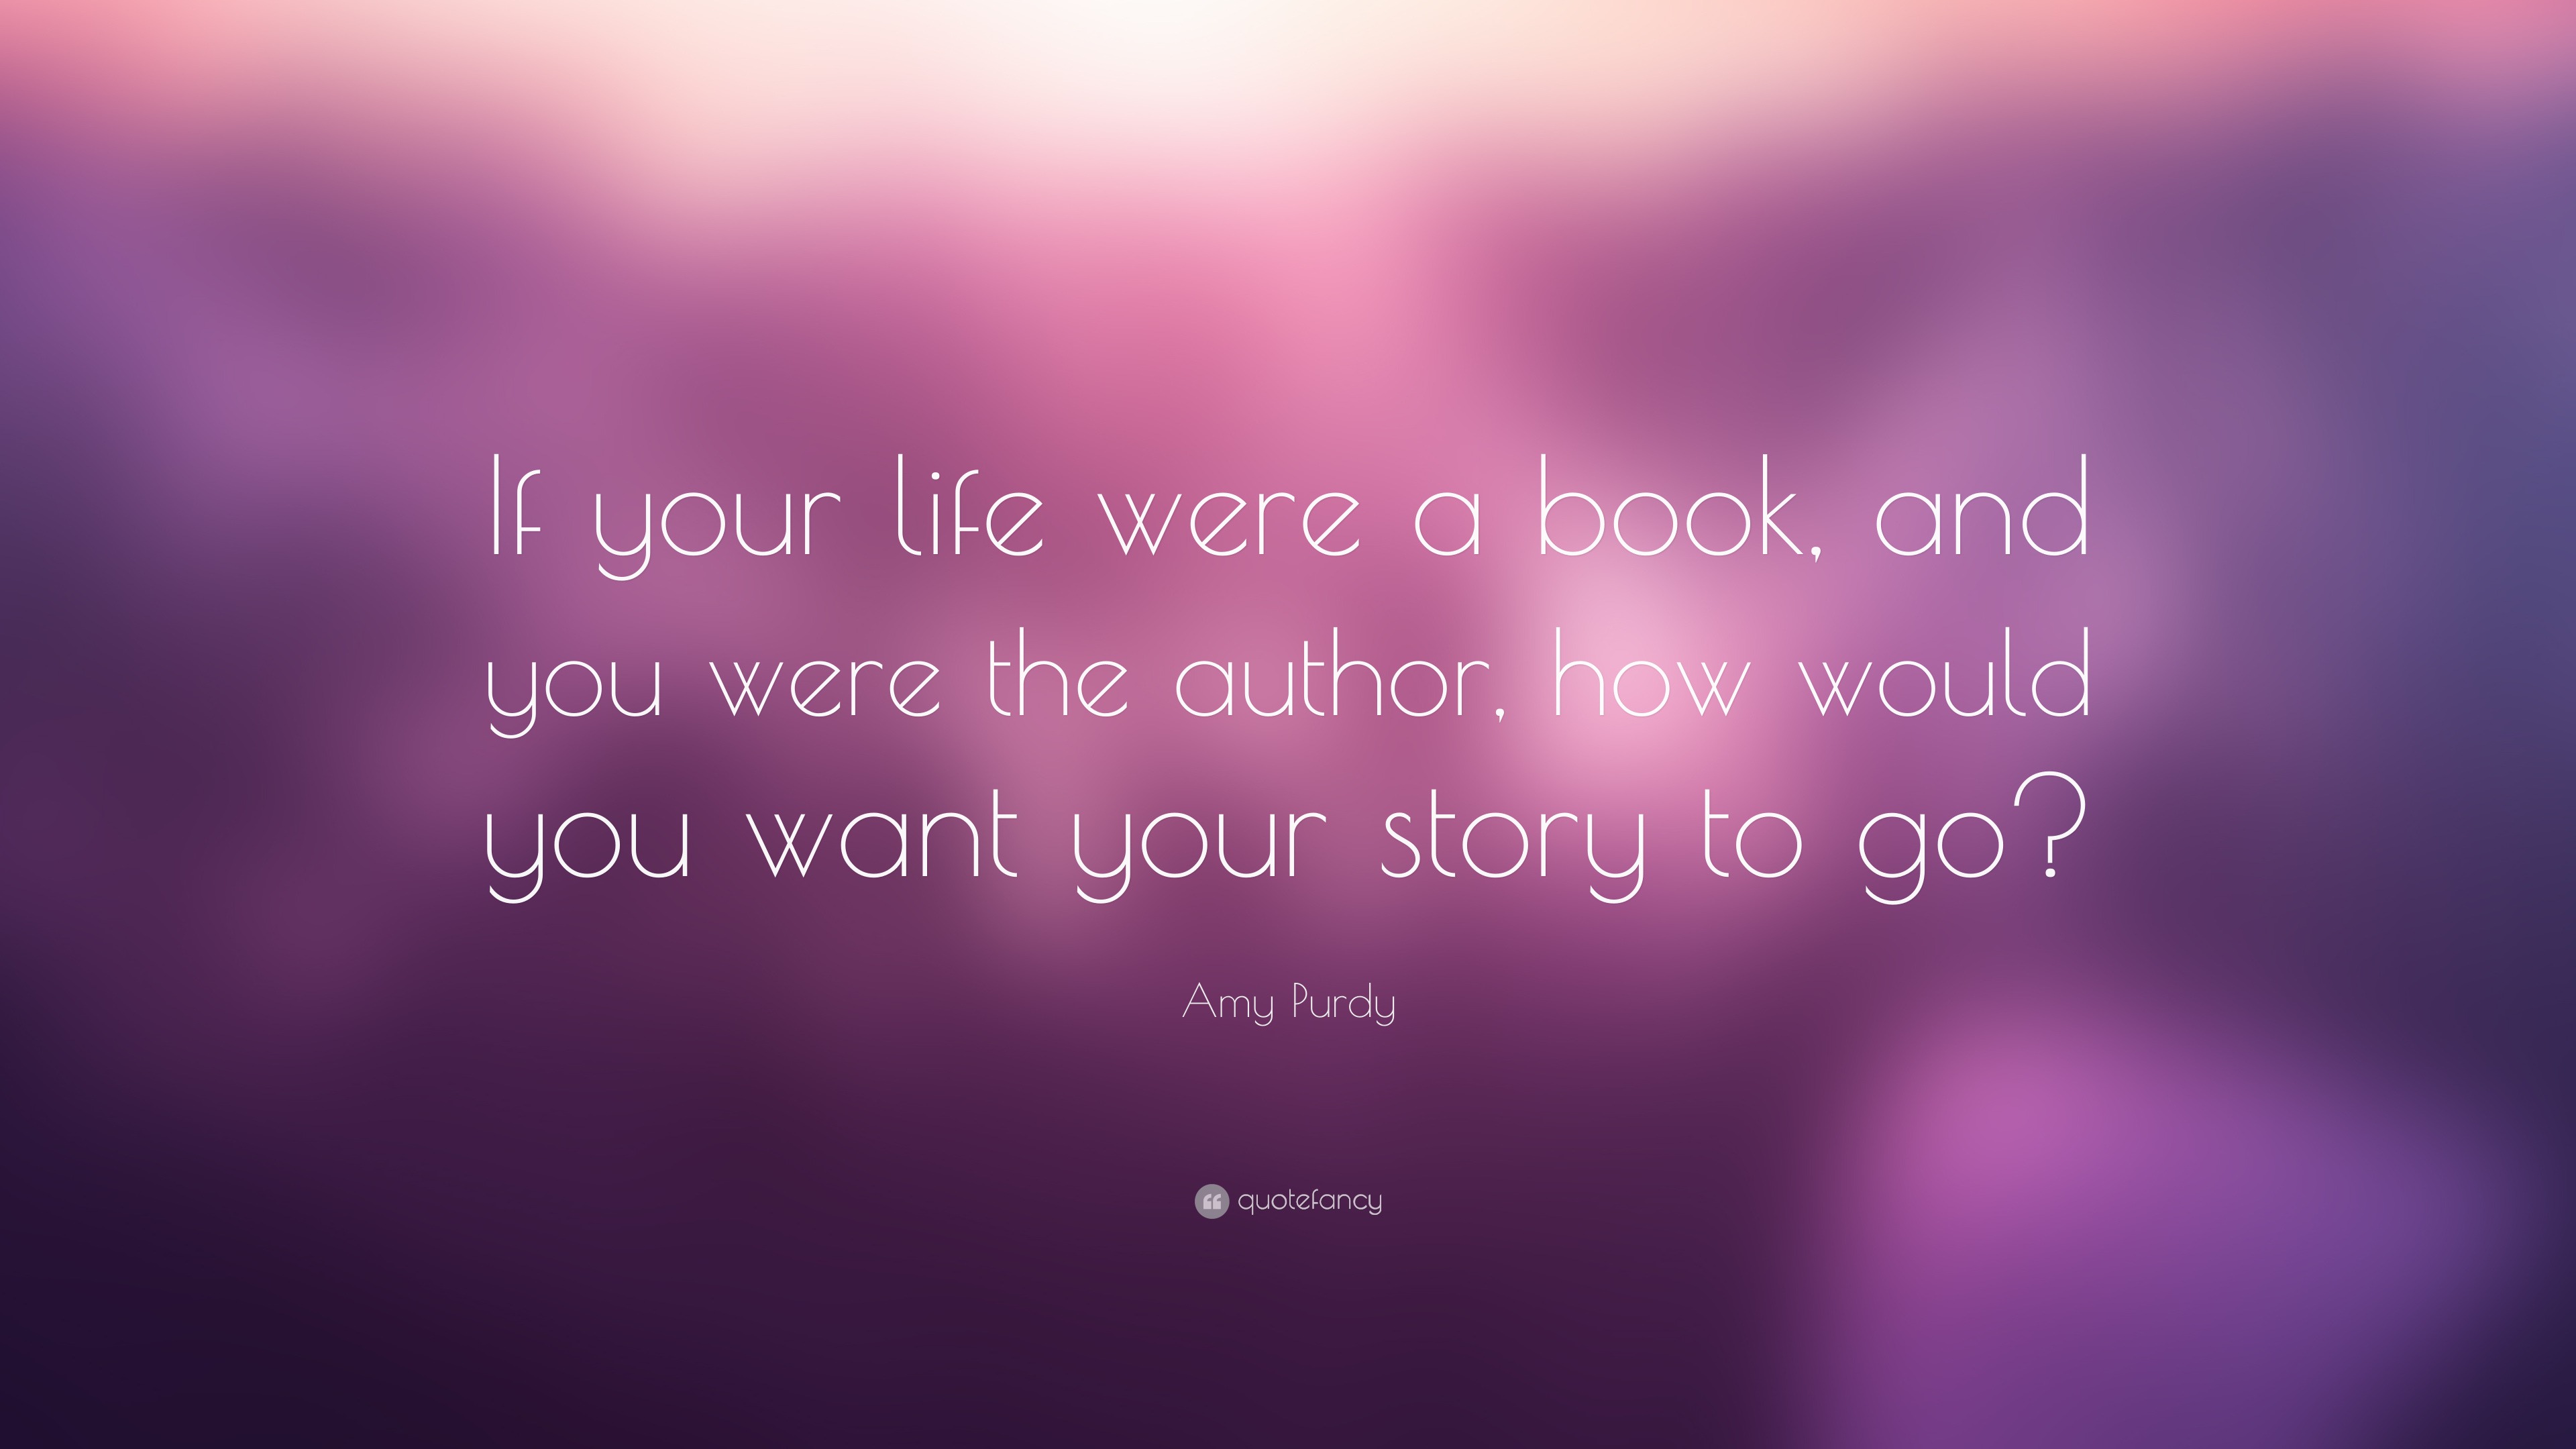 Amy Purdy Quote: “If your life were a book, and you were the author ...